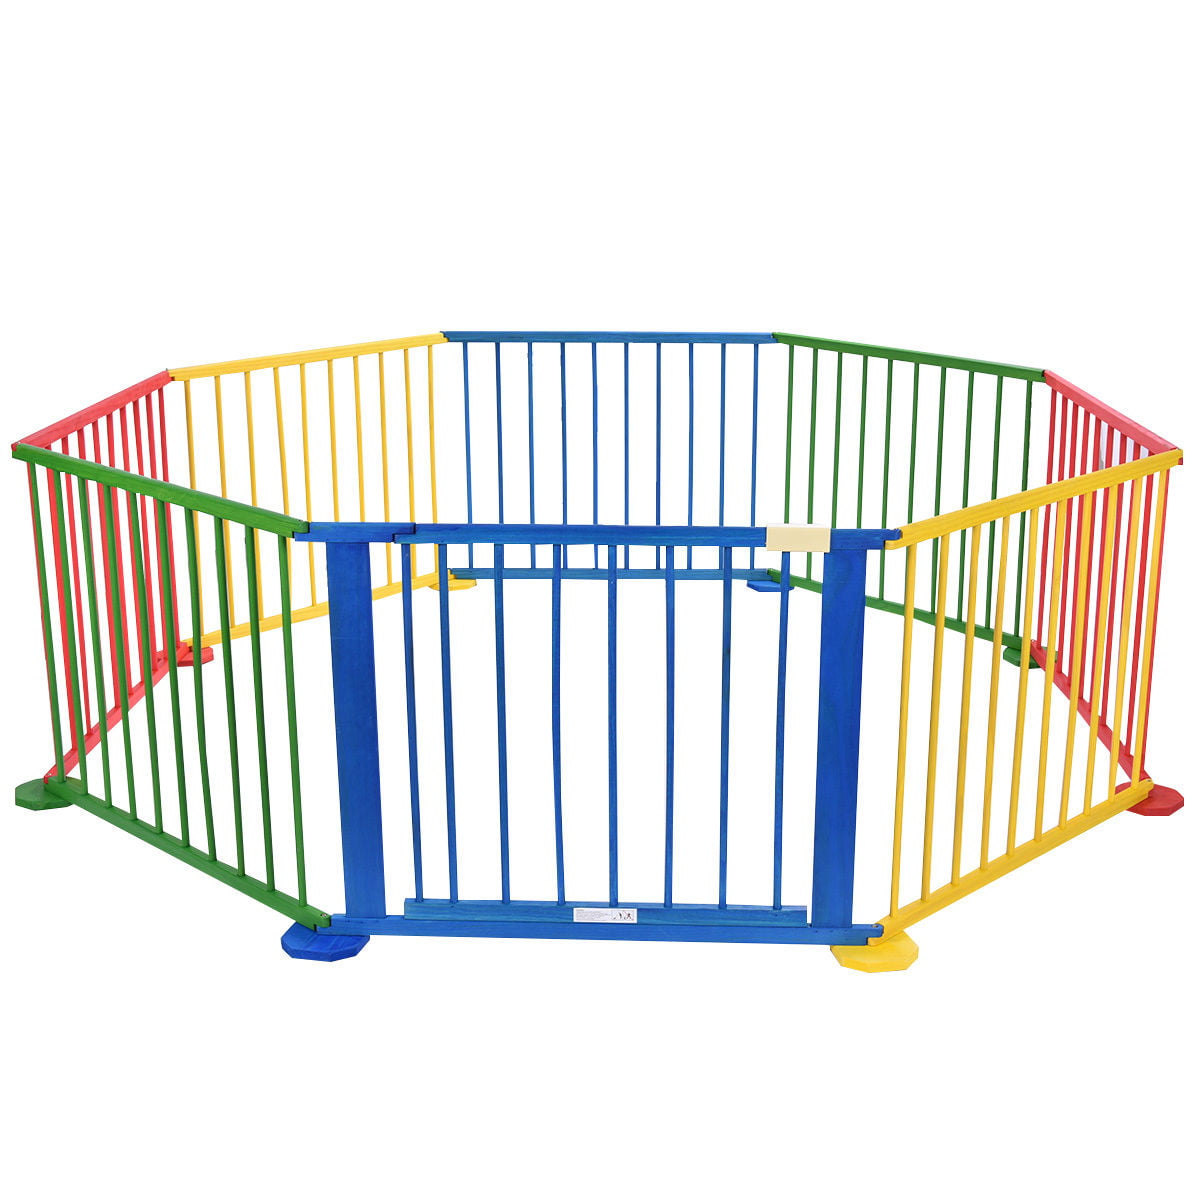 Baby Playpen 8 Sides Foldable Wood Room Divider Safety Kid Play Yard Fence Guard 